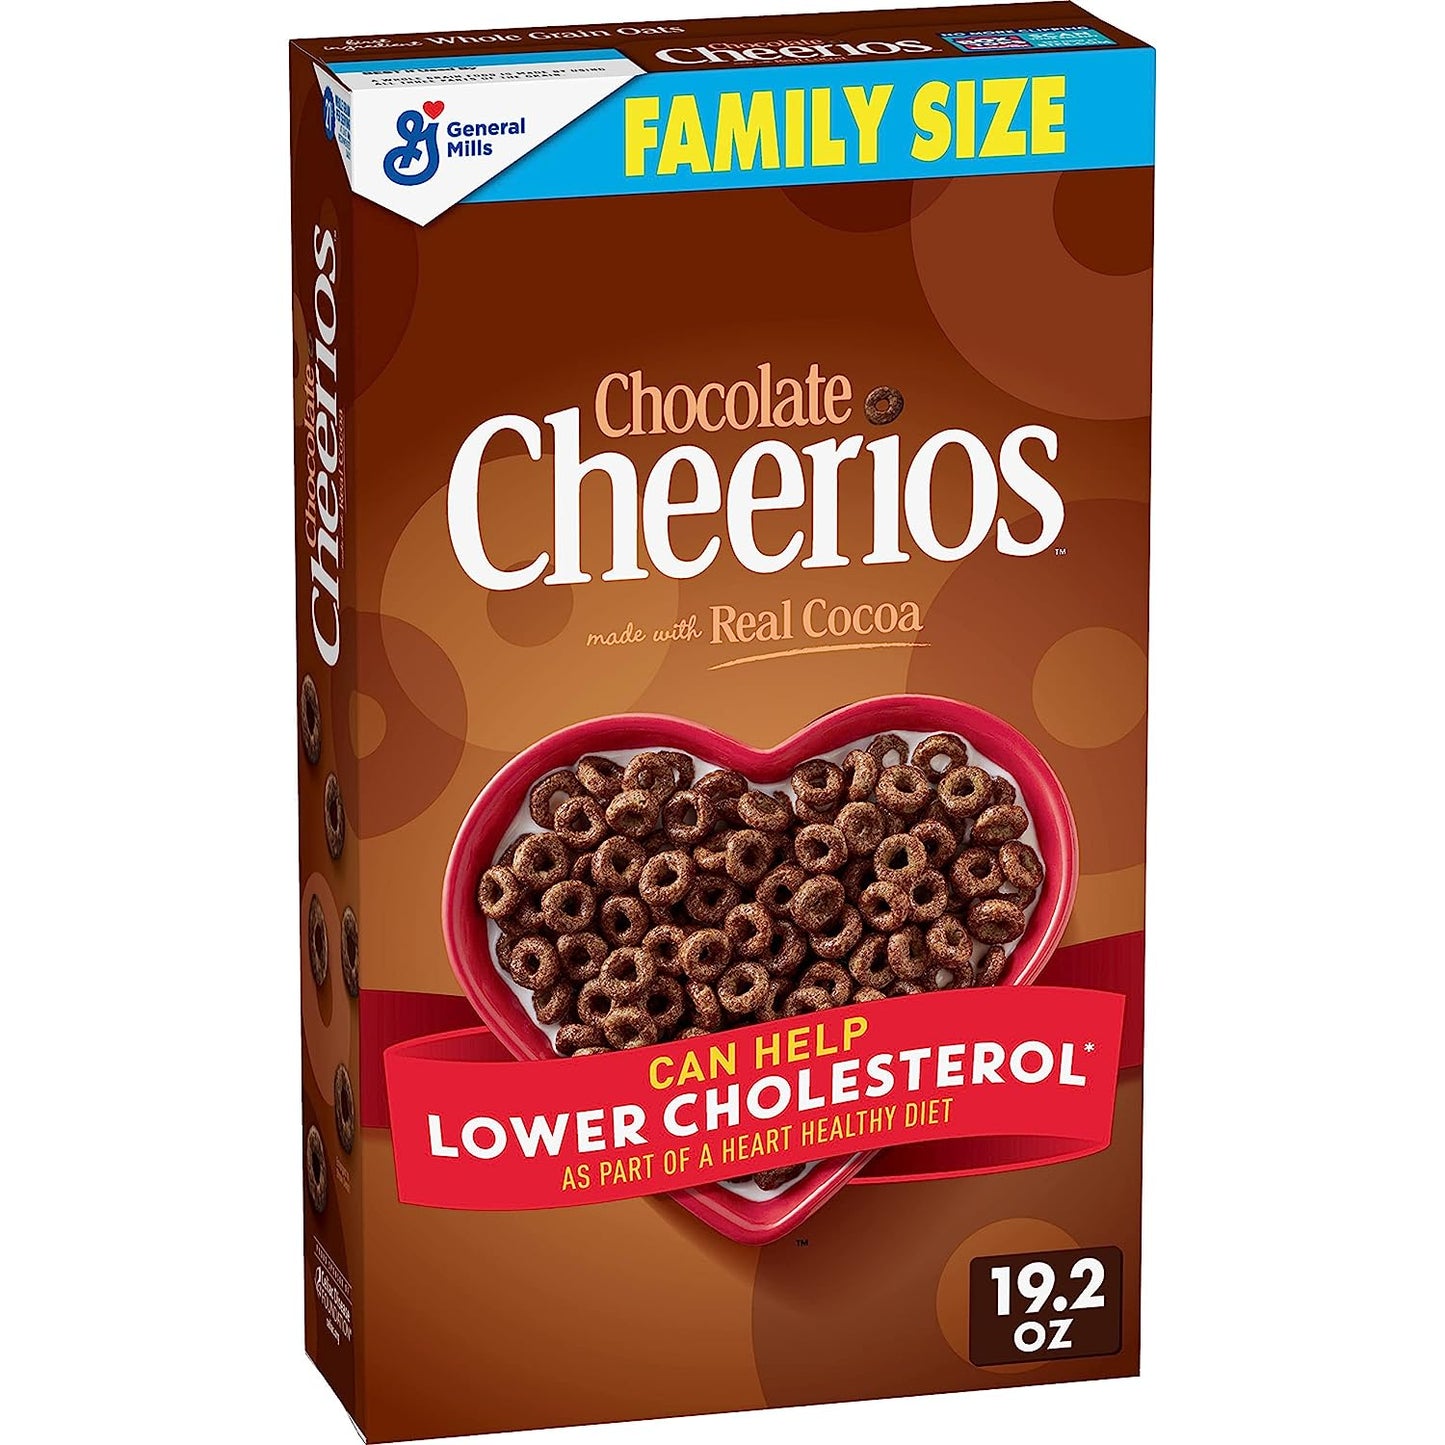 Chocolate Cheerios Heart Healthy Cereal, Gluten Free Cereal With Whole Grain Oats, 19.2 OZ Family Size